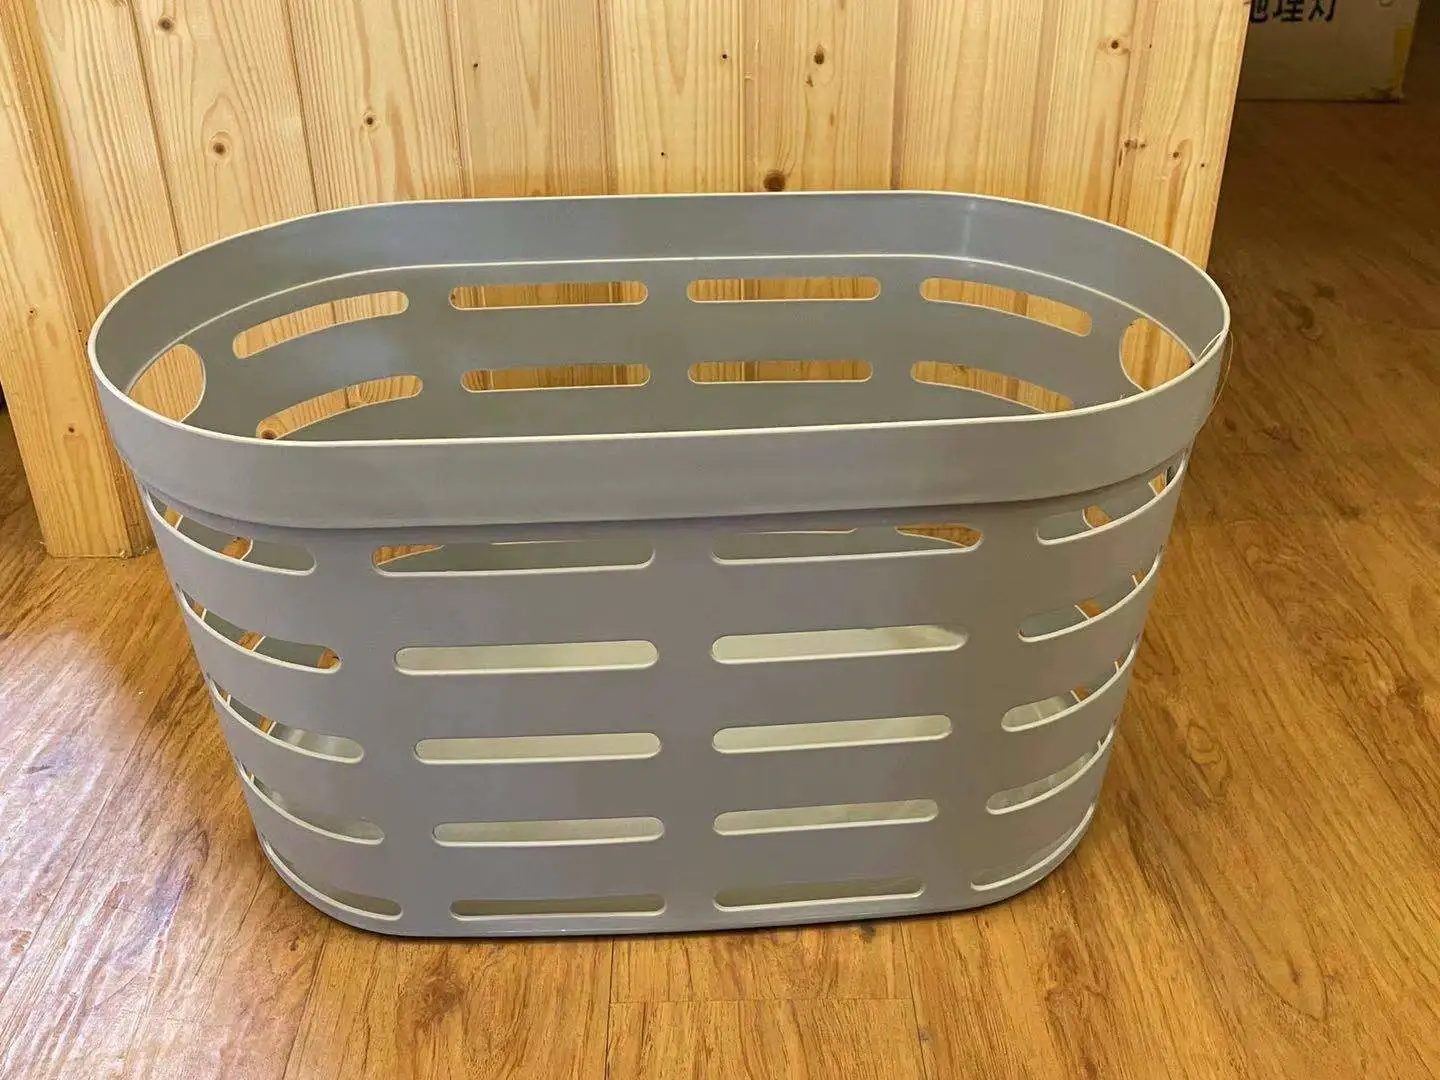 Is Wicker Or Plastic More Suitable For Laundry Baskets?